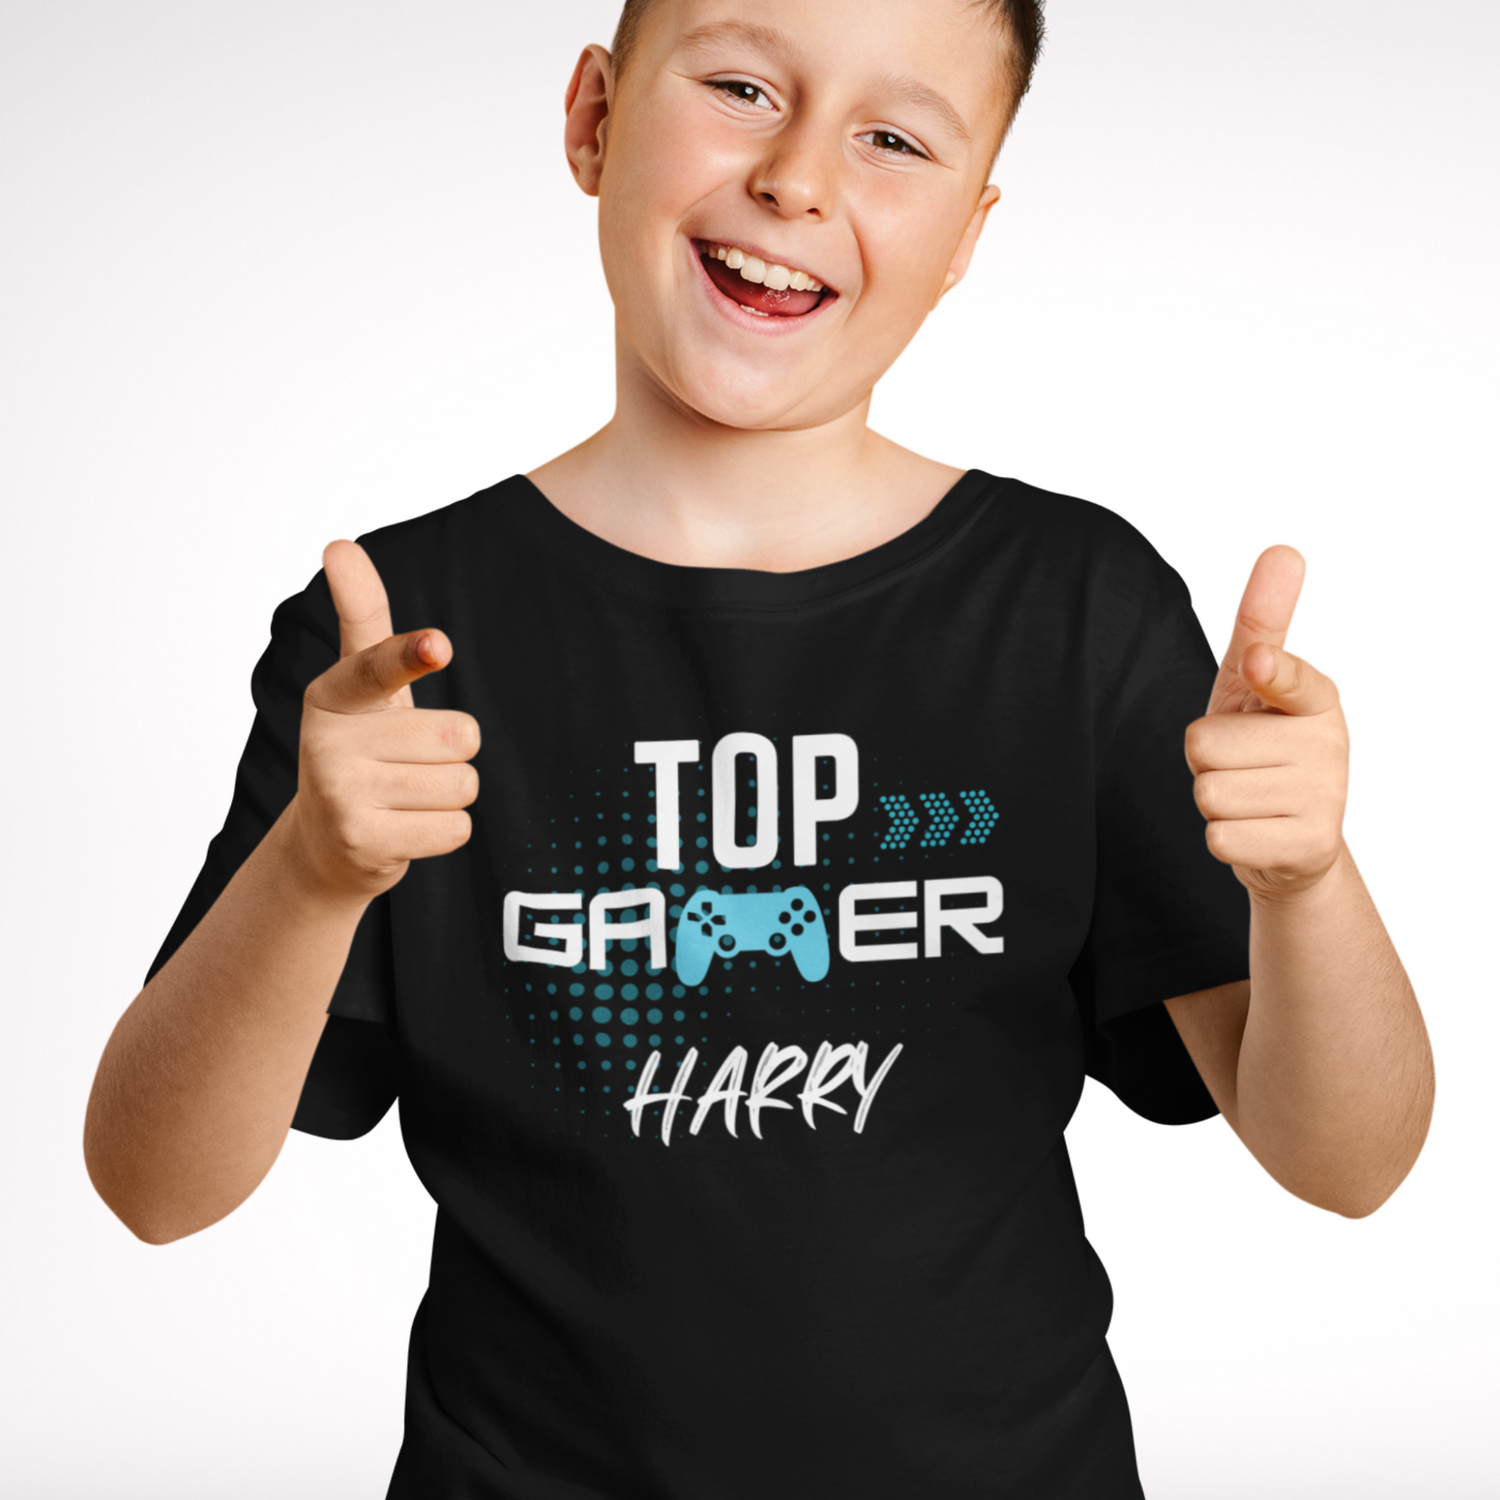 Black t-shirt with 'Top Gamer' slogan and child's name beneath